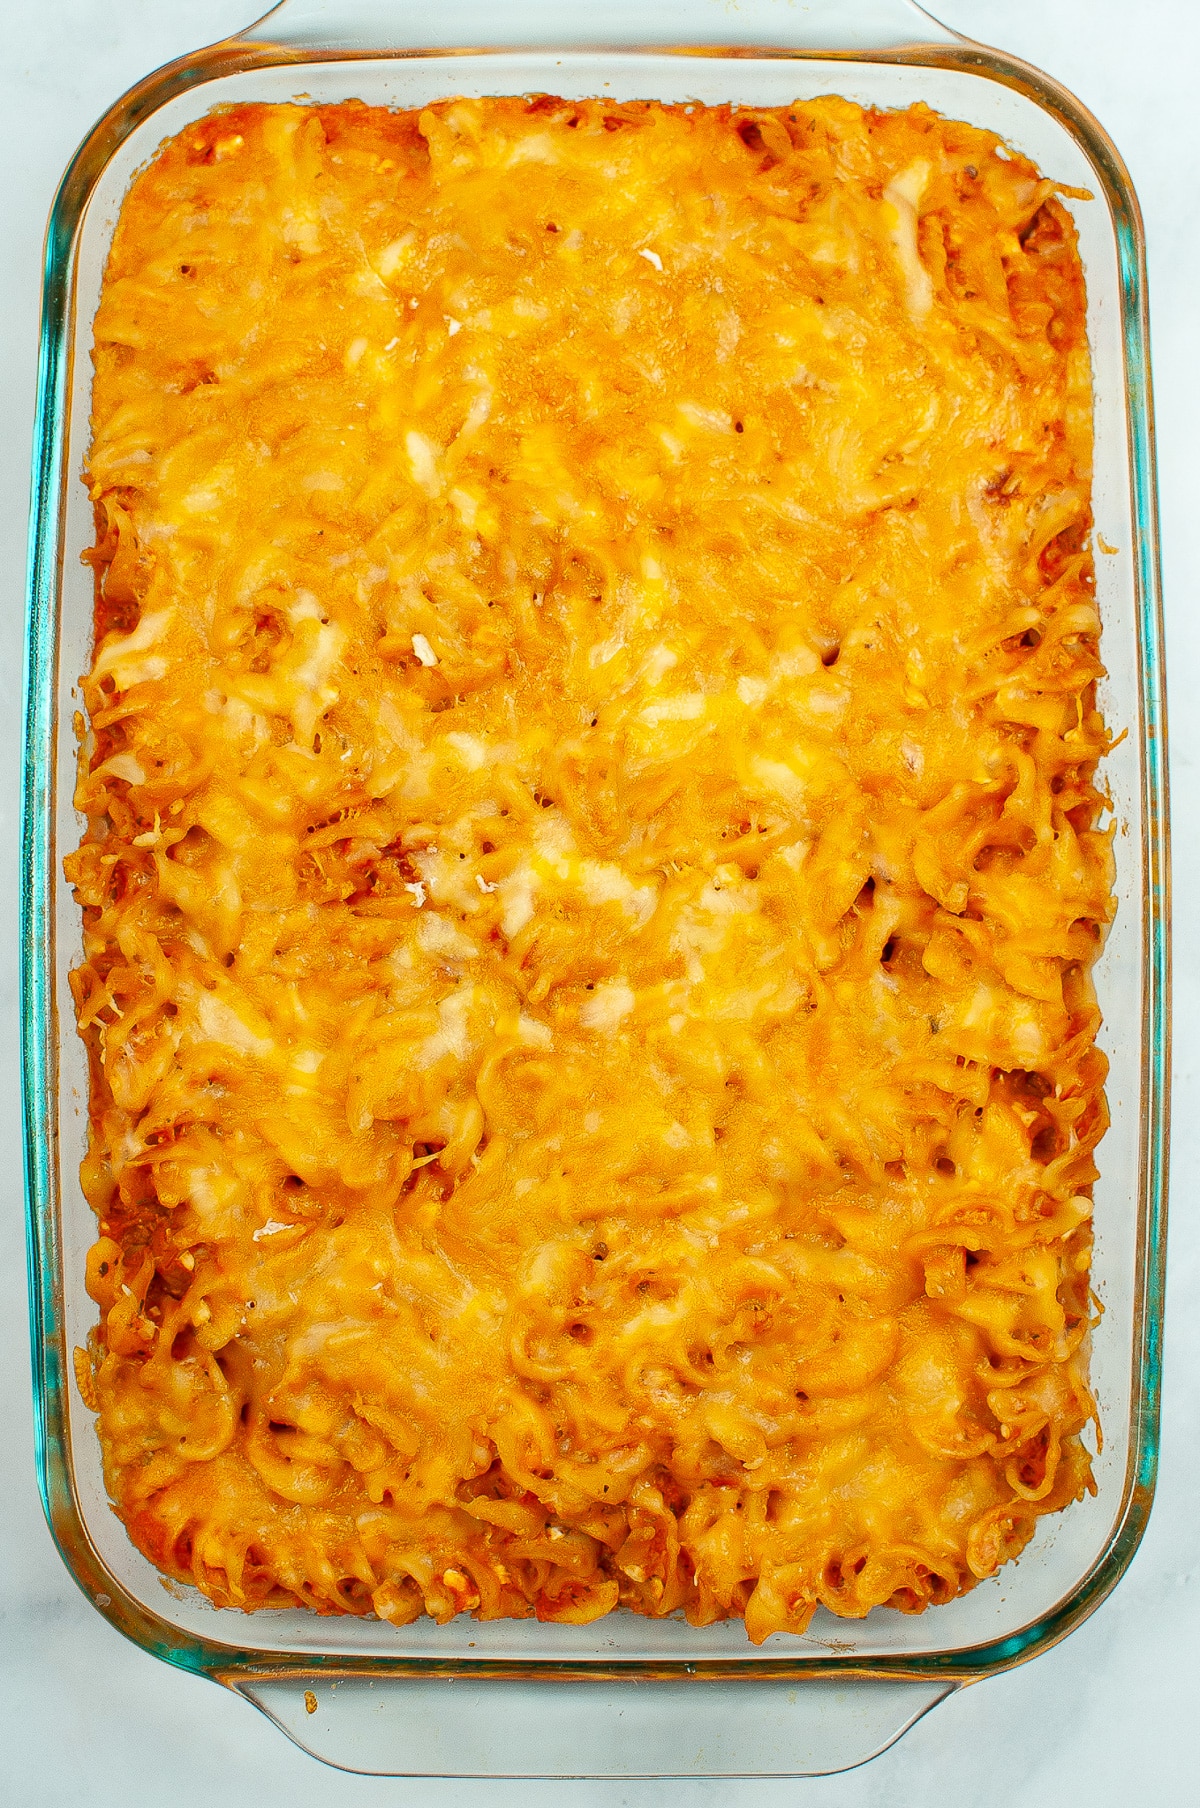 Cheesy rotini bake pasta in a casserole dish from above after baking.